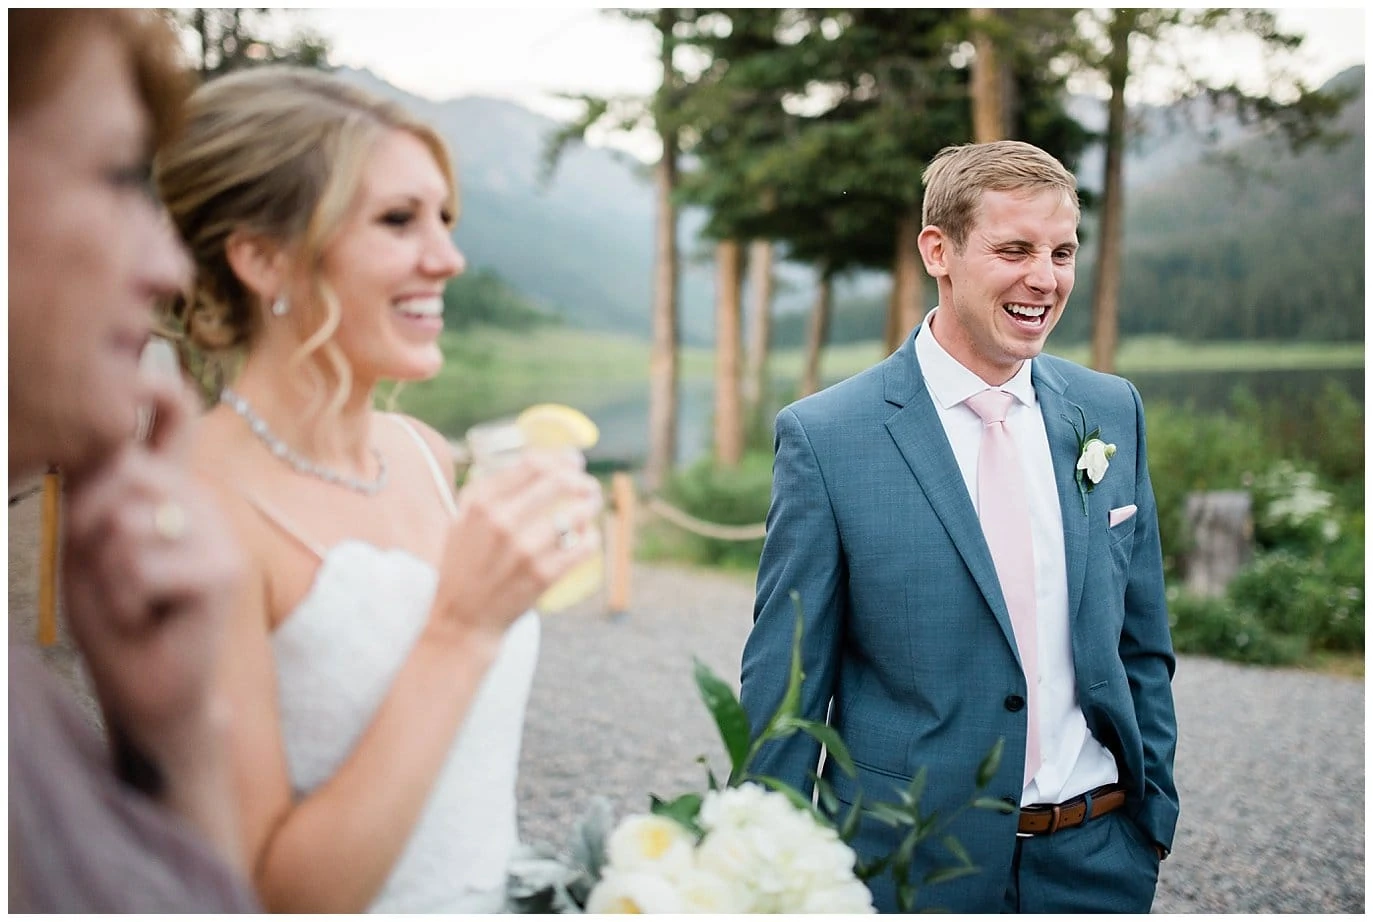 groom and bride sipping cocktails by lake at Piney River Ranch Summer Wedding by Avon wedding photographer Jennie Crate photographer